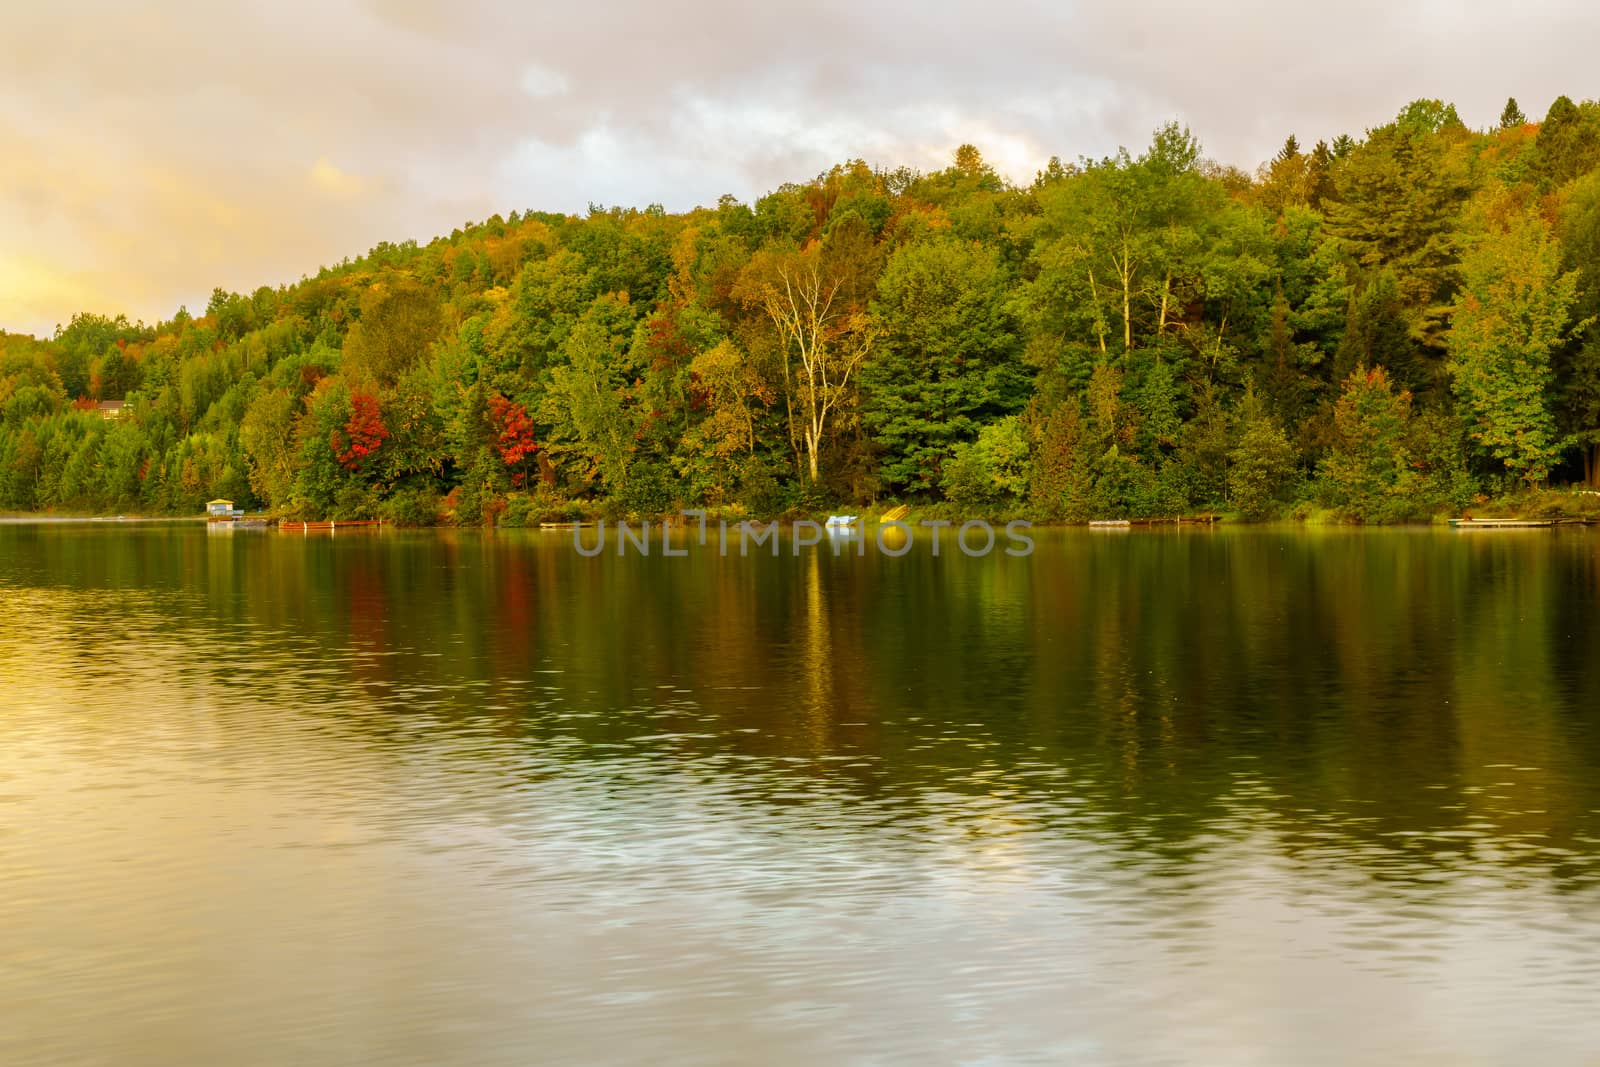 Sunrise view of the Lac Rond lake, in Sainte-Adele, Laurentian Mountains, Quebec, Canada